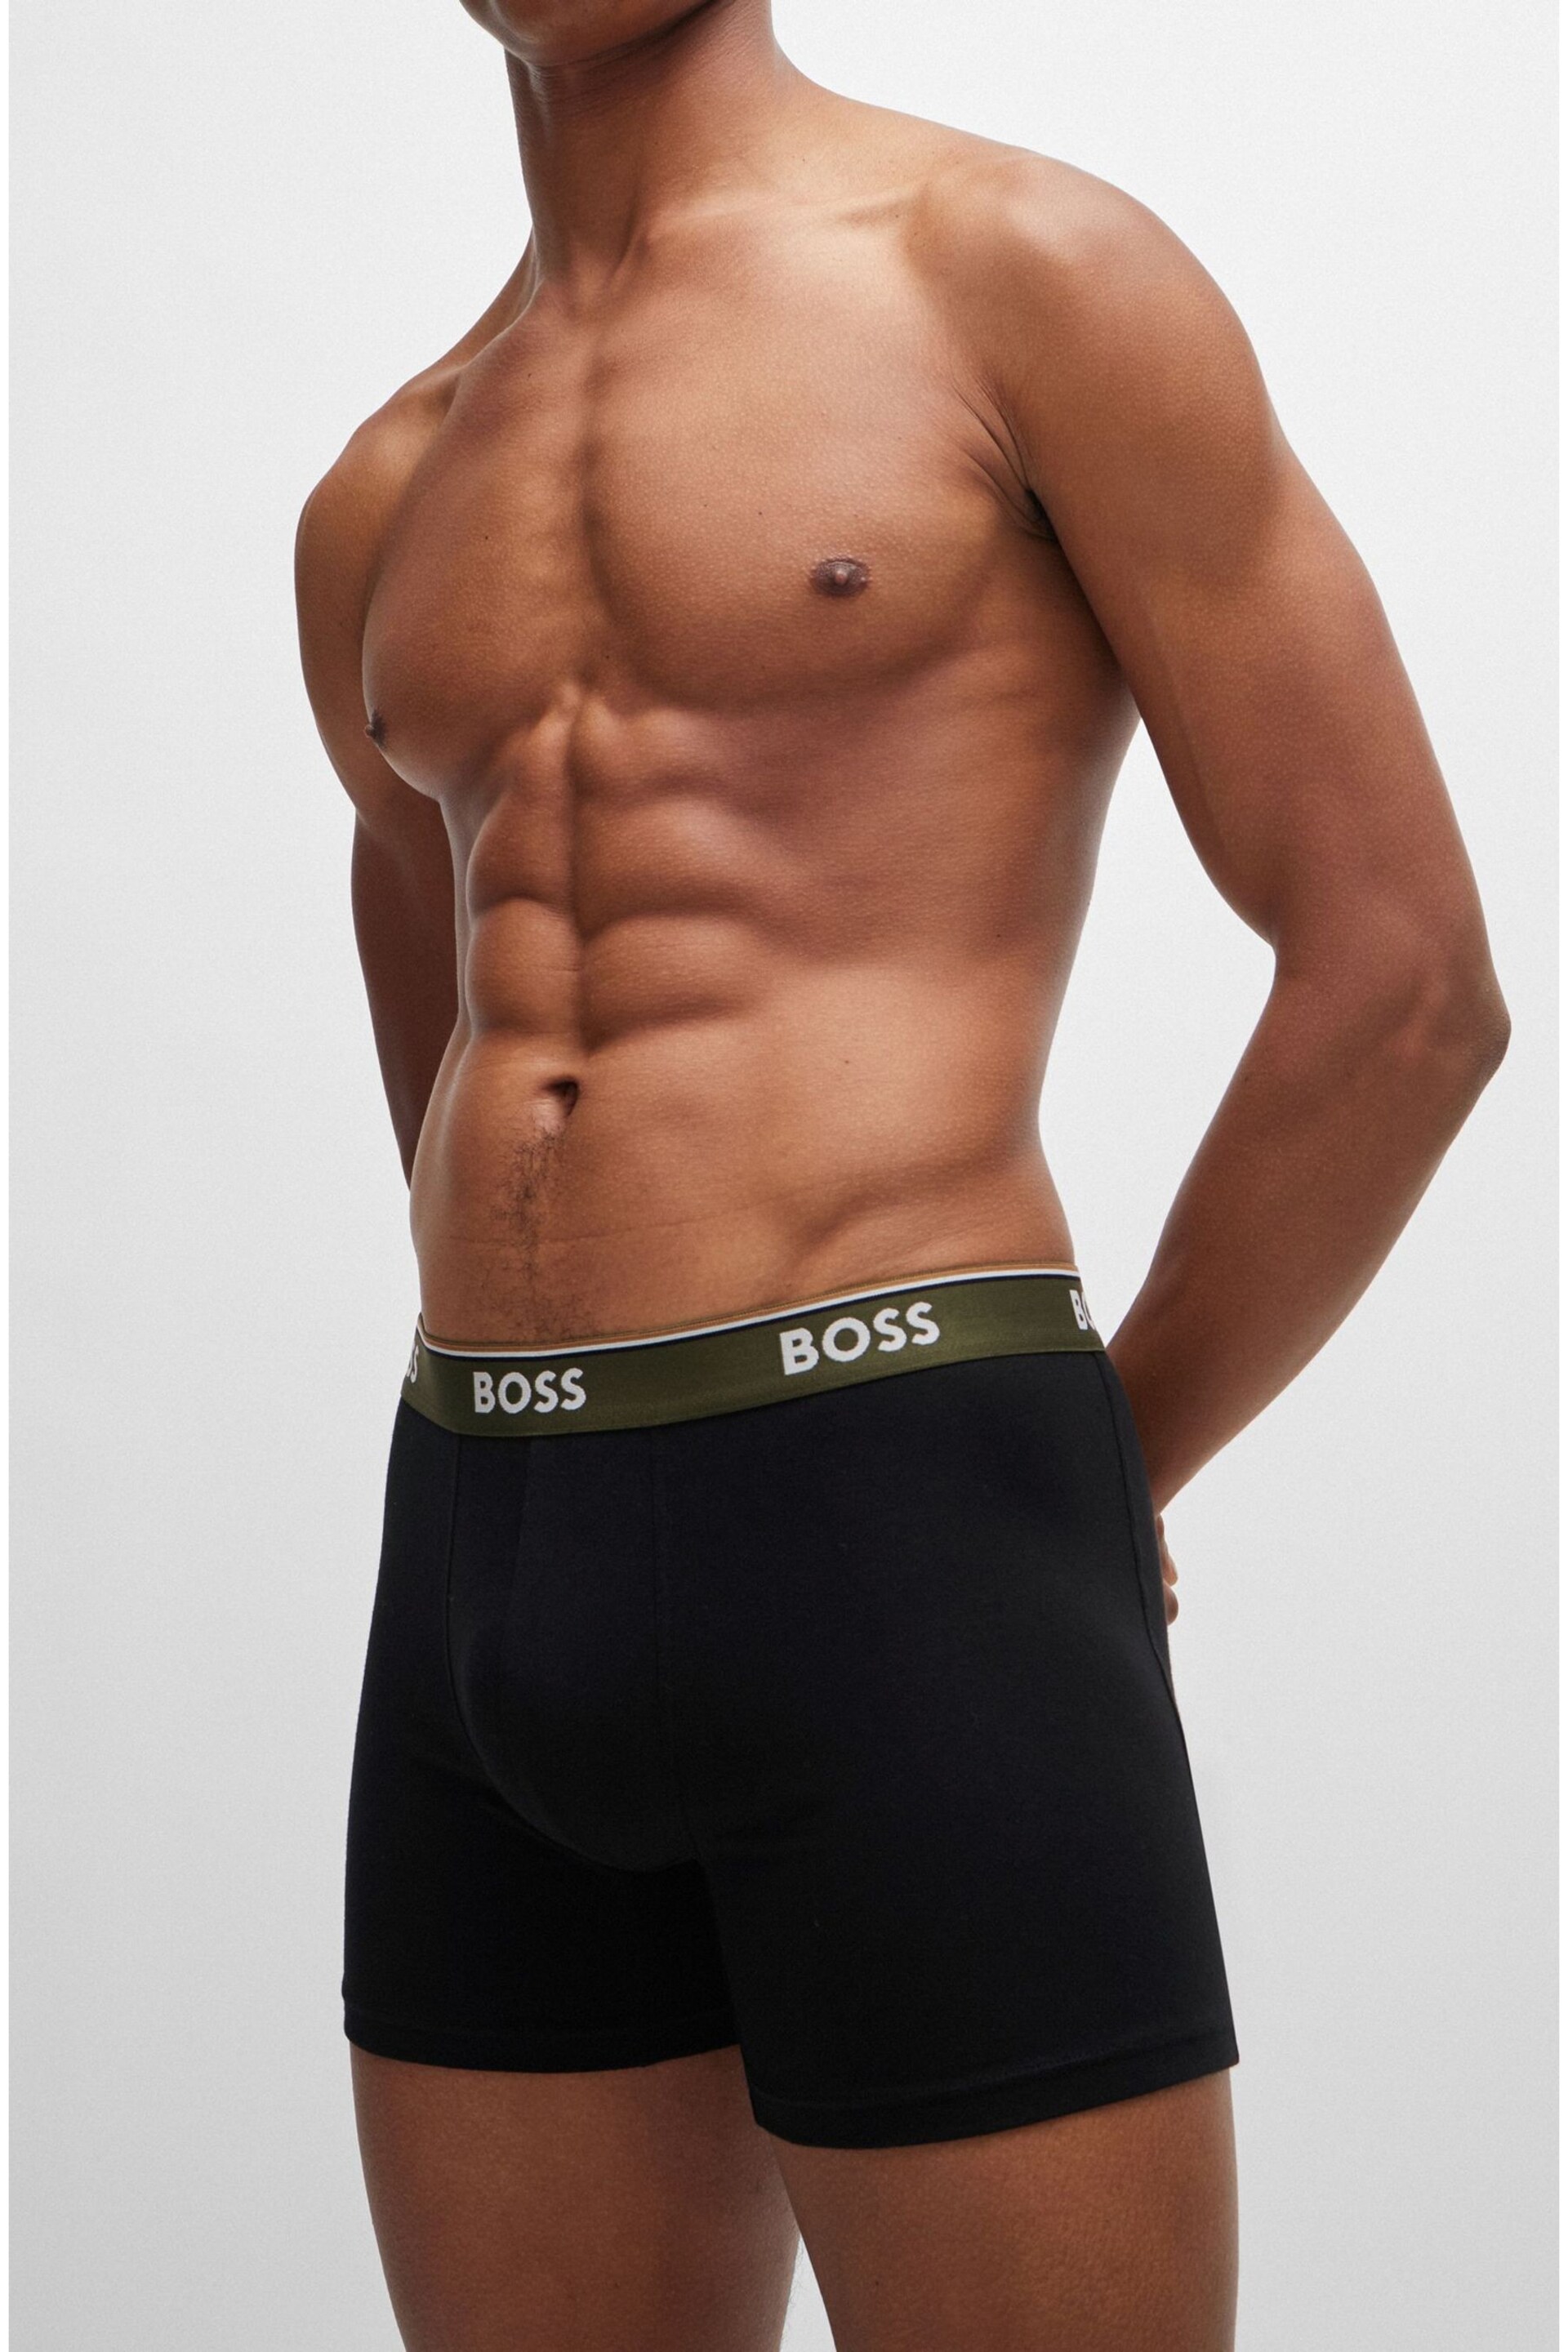 BOSS Black of Stretch-Cotton Boxer Briefs 3 Pack With Logos - Image 9 of 10